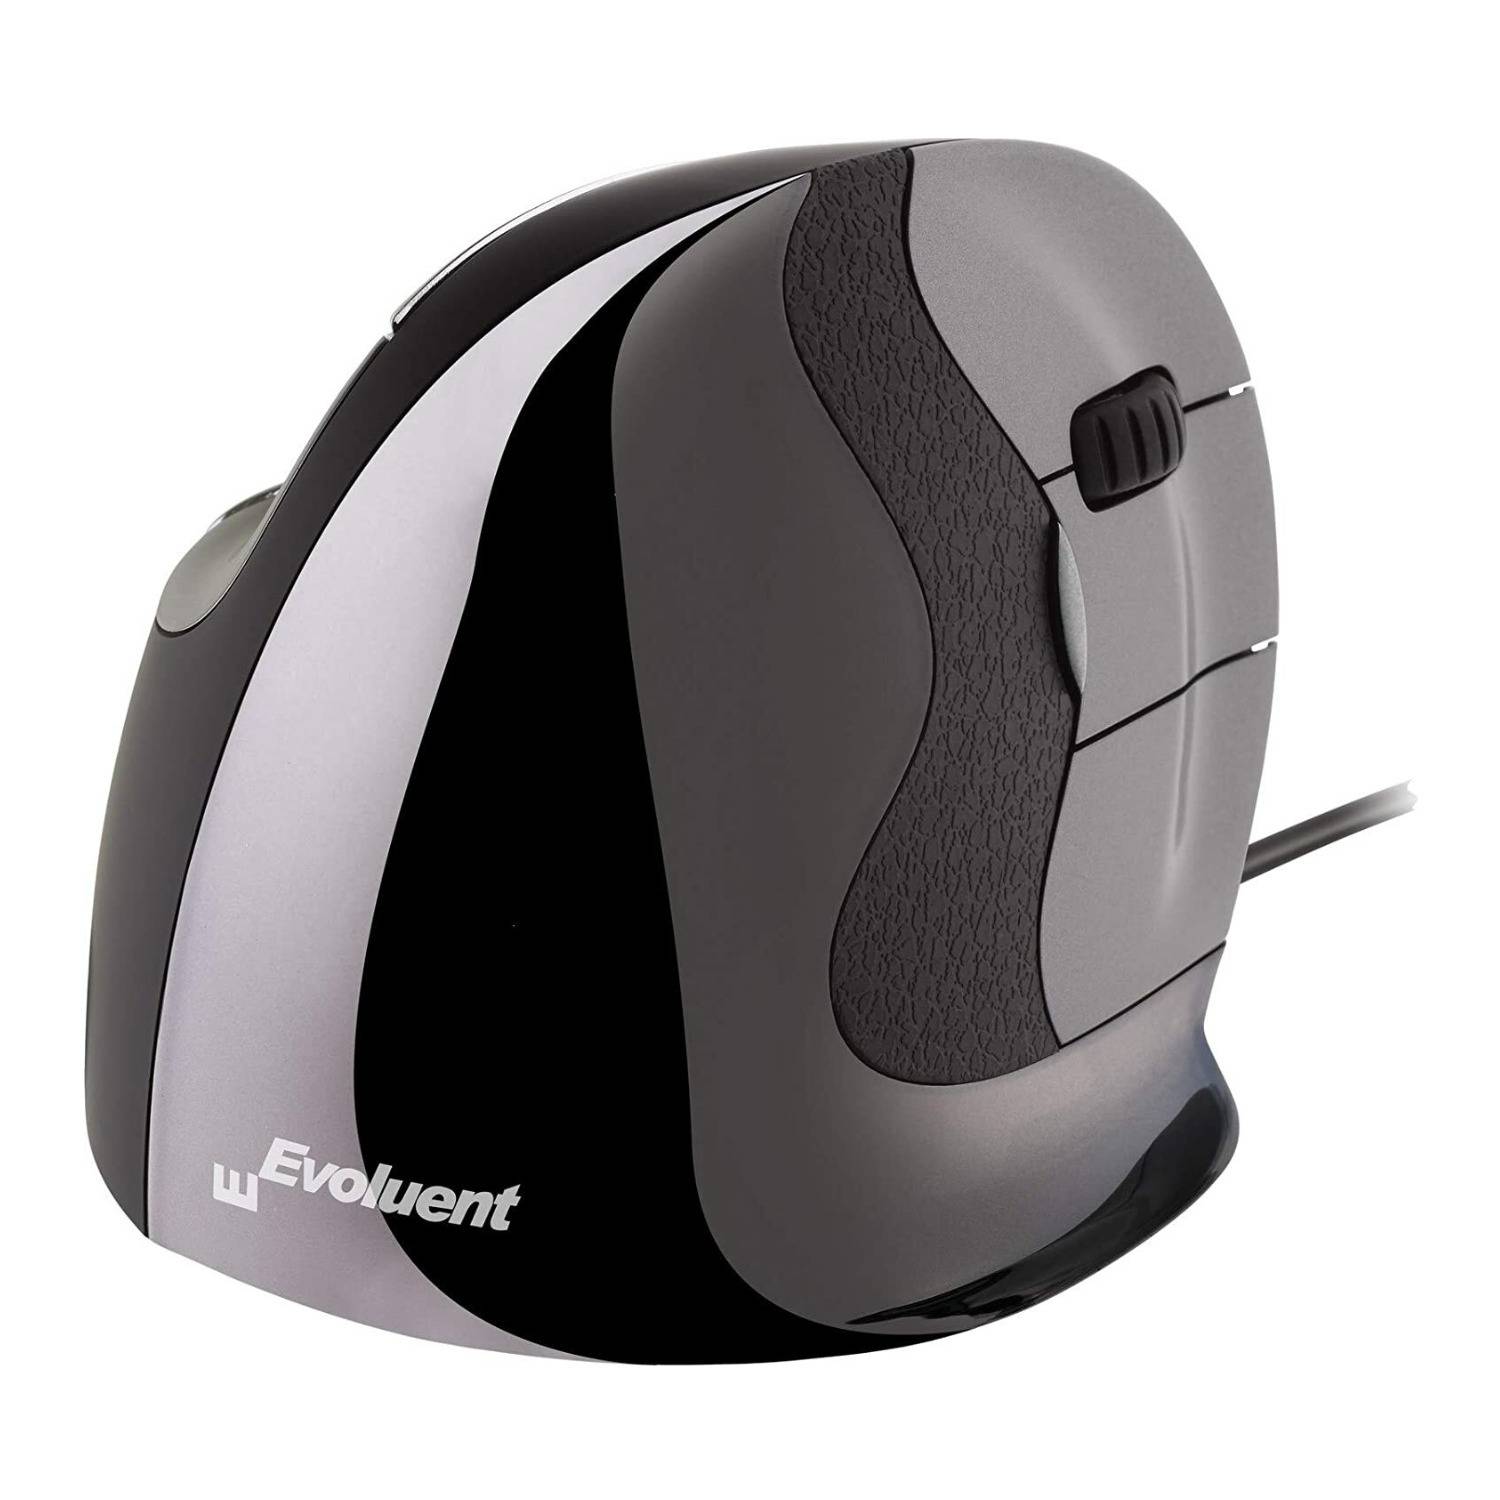 Evoluent VMDS VerticalMouse D Right Hand Ergonomic USB Wired Mouse (Small)